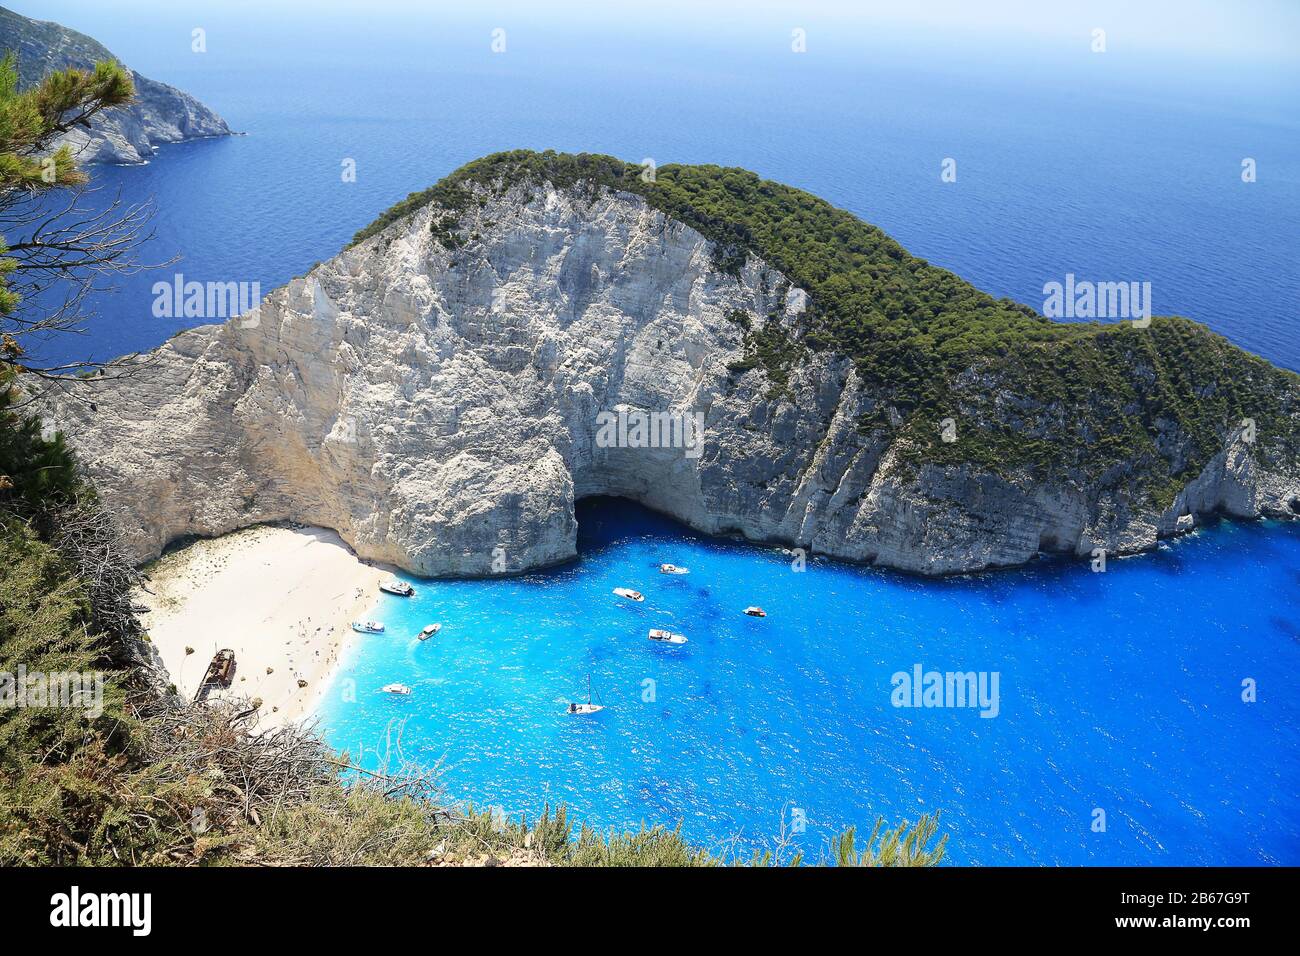 Best beach in the world,  top view 10 best beaches in the world, Shipwreck Beach, Greece Stock Photo